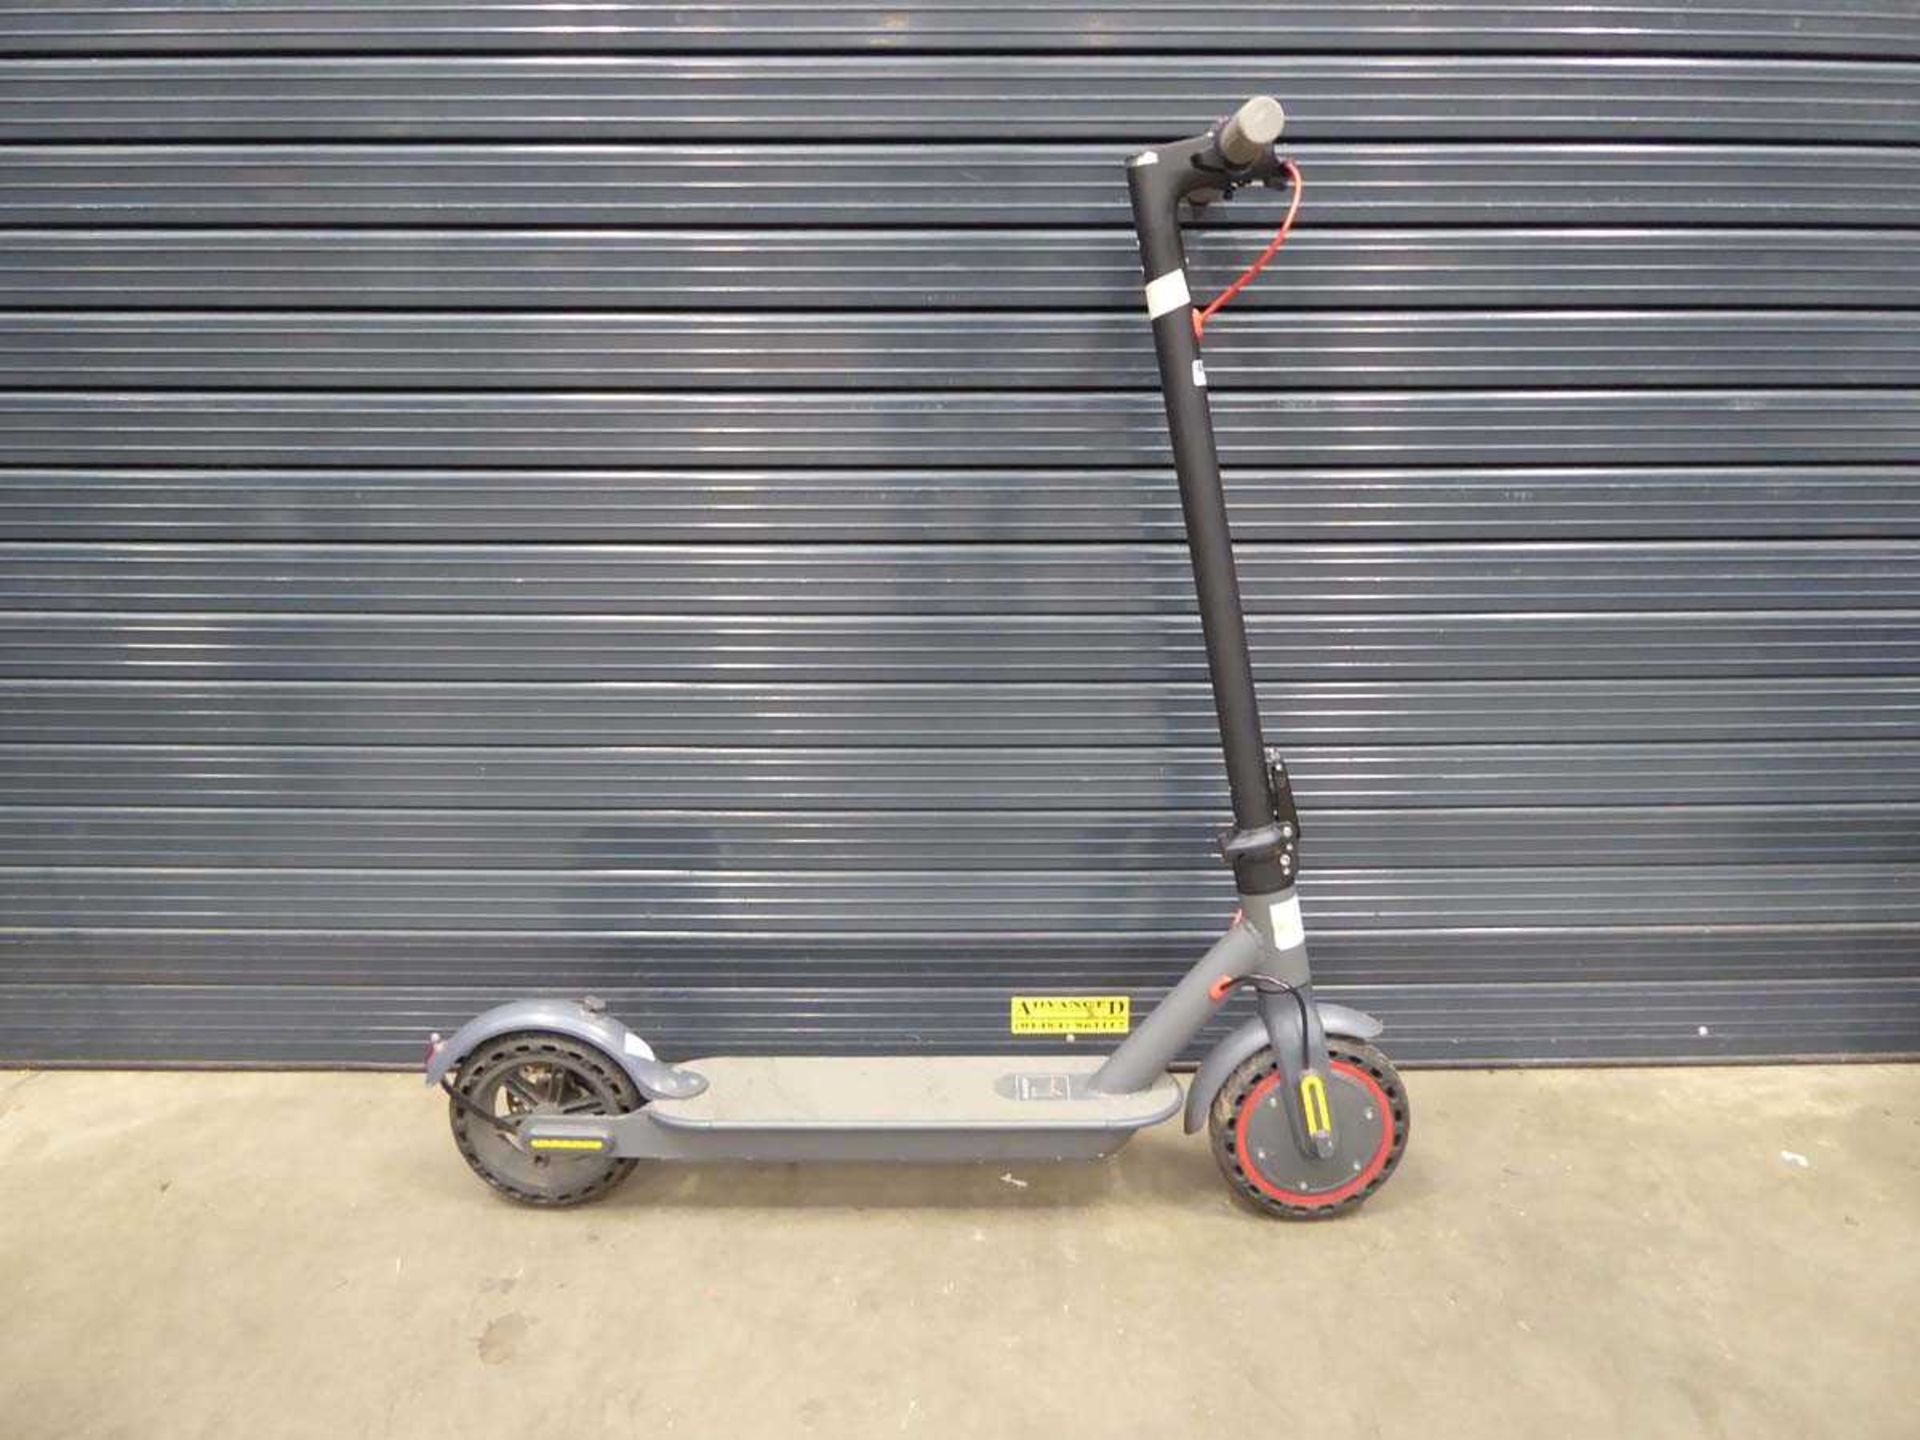 Aovo Pro electric scooter for spares or repair, no charger